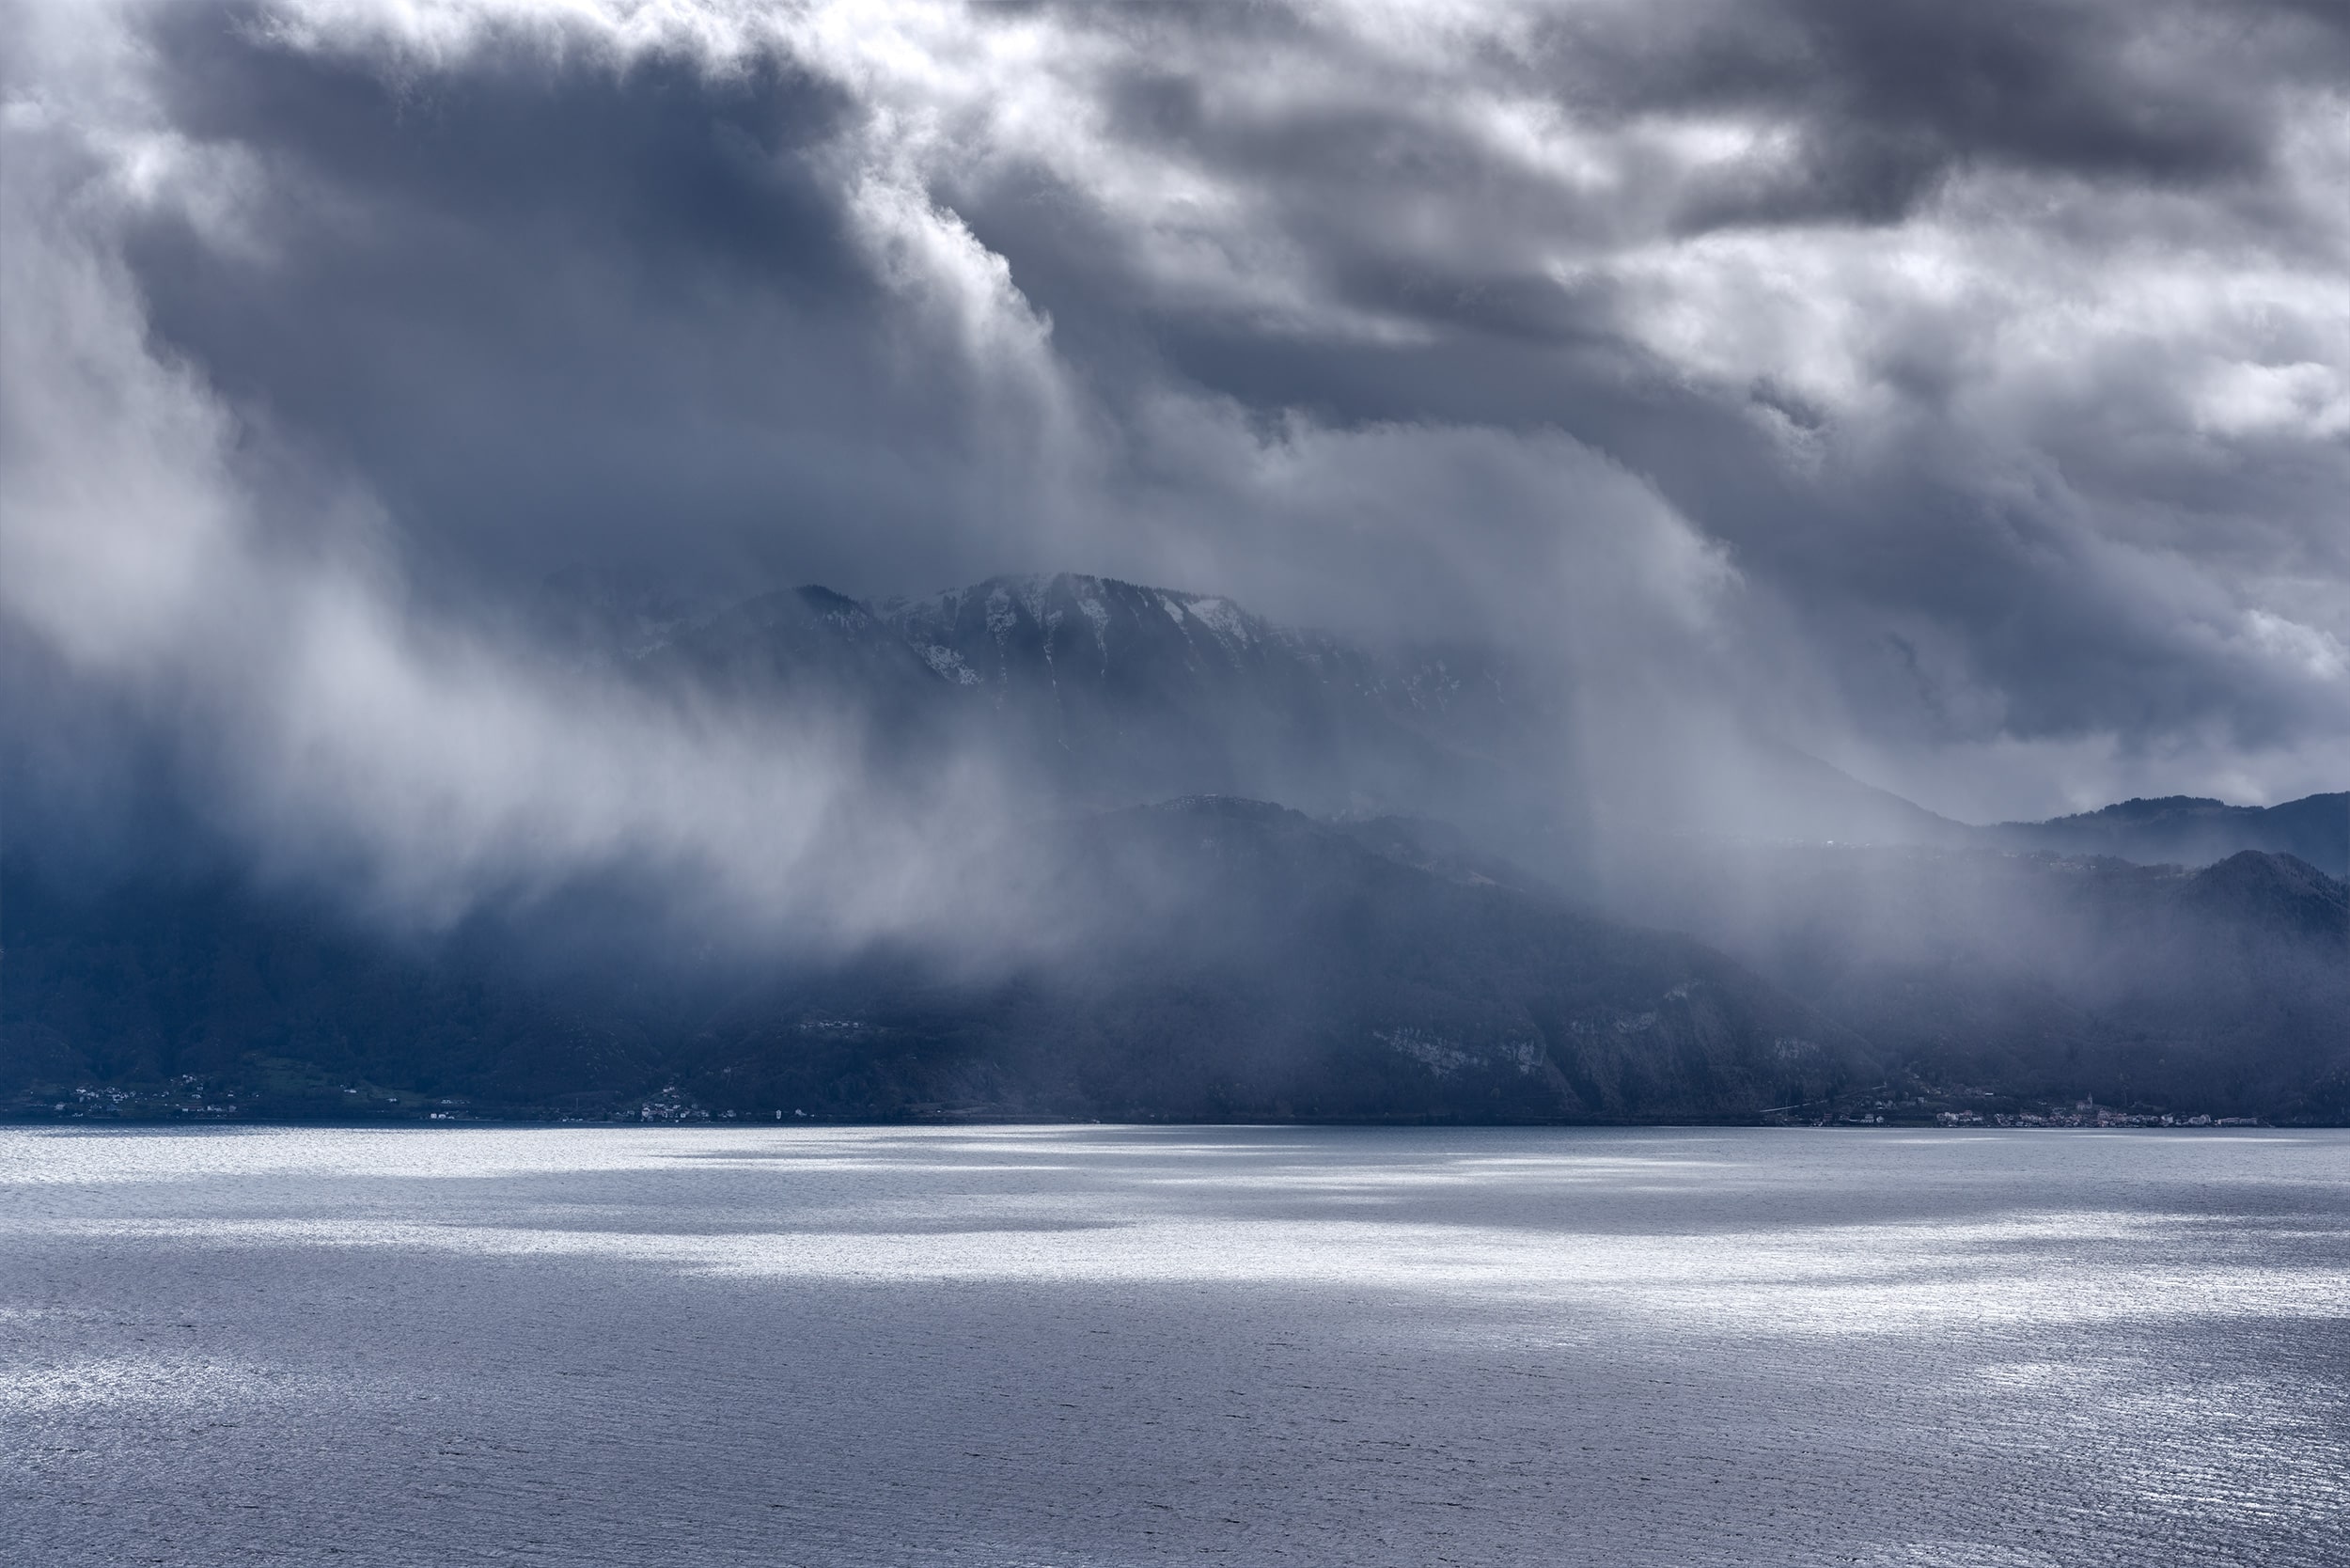 Experience the captivating drama of a rainy day at Lavaux Vineyard Terrace in Switzerland, beautifully captured in landscape photography by Jennifer Esseiva using her Nikon D810. This striking image immerses viewers in the unique ambiance and natural splendor of the Swiss countryside. Explore the dynamic contrast between light and shadow, as well as the rich textures of the landscape, in Jennifer's stunning portfolio of landscape photography.